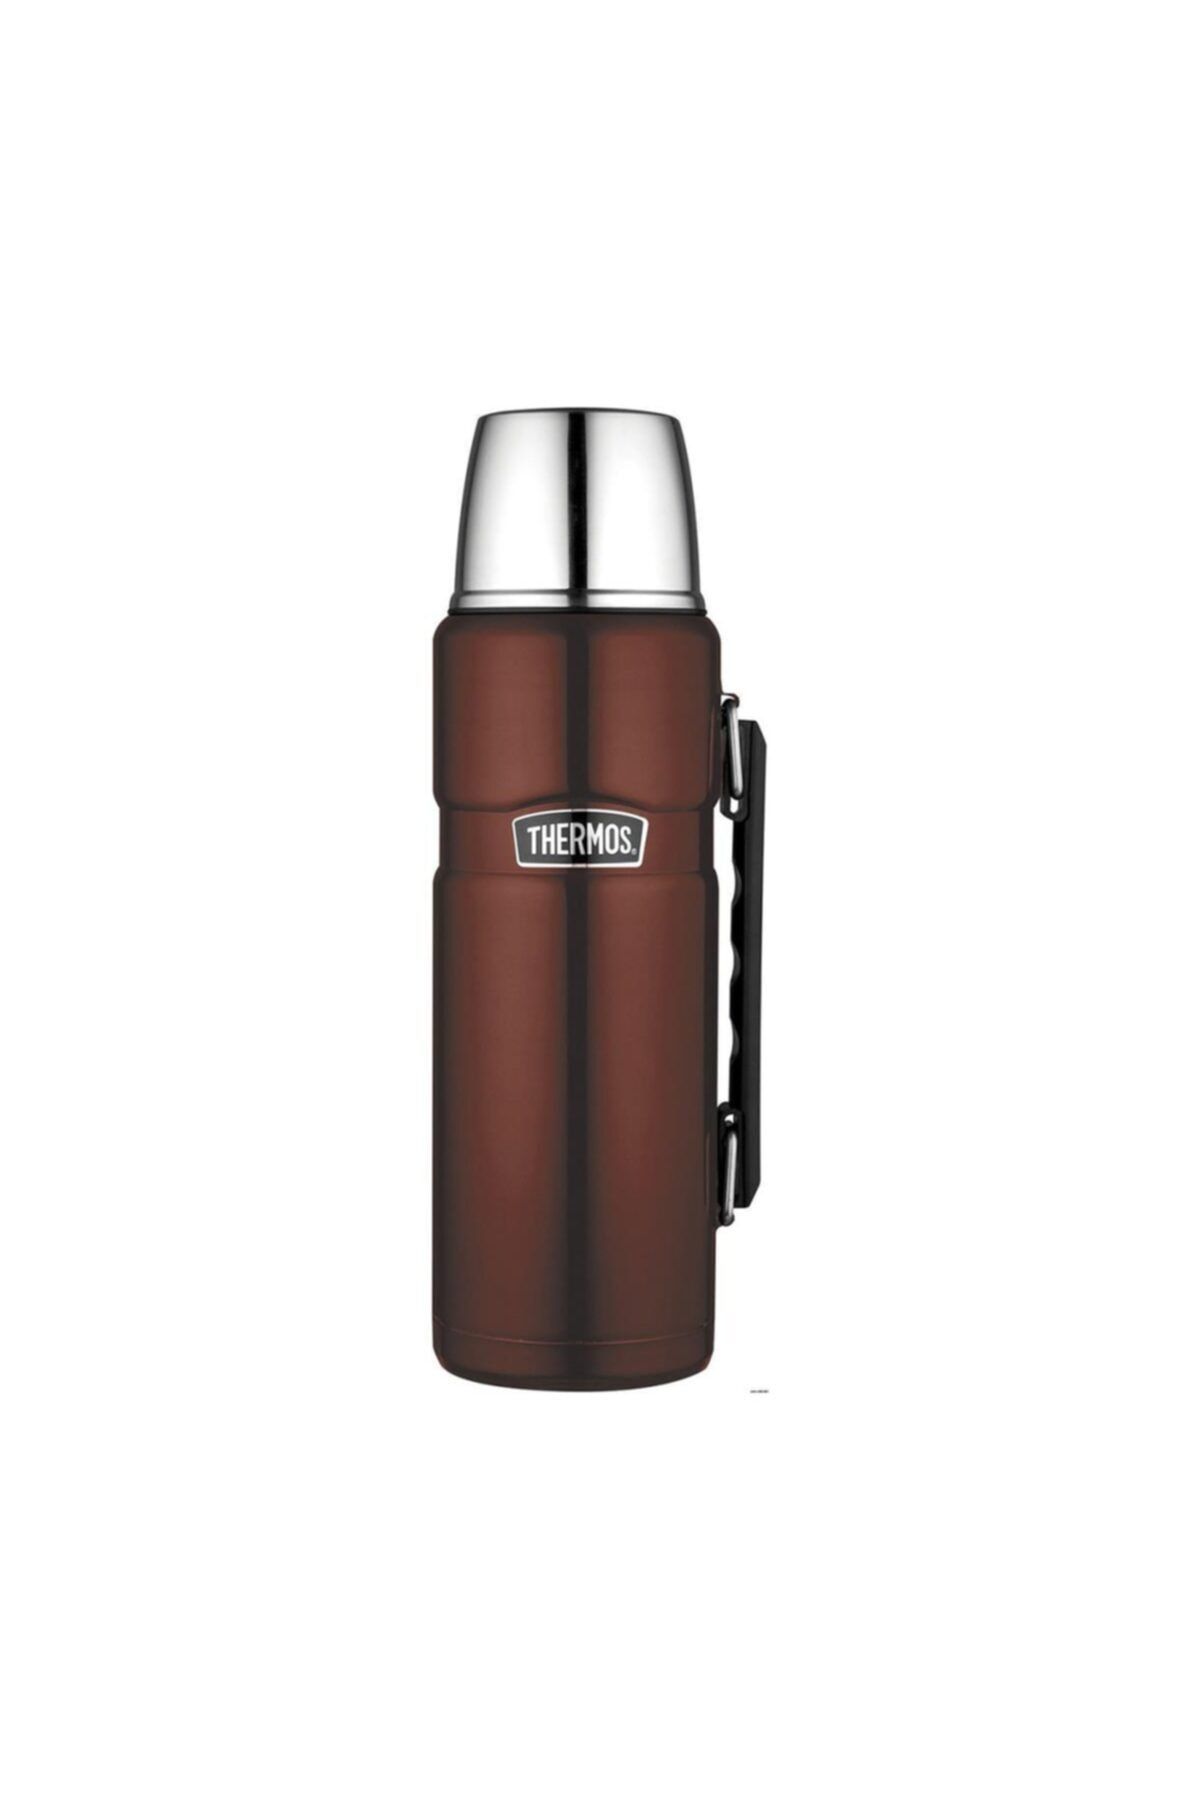 Thermos Sk 2010 Stainless King Large Copper 1.2 Lt. 183948